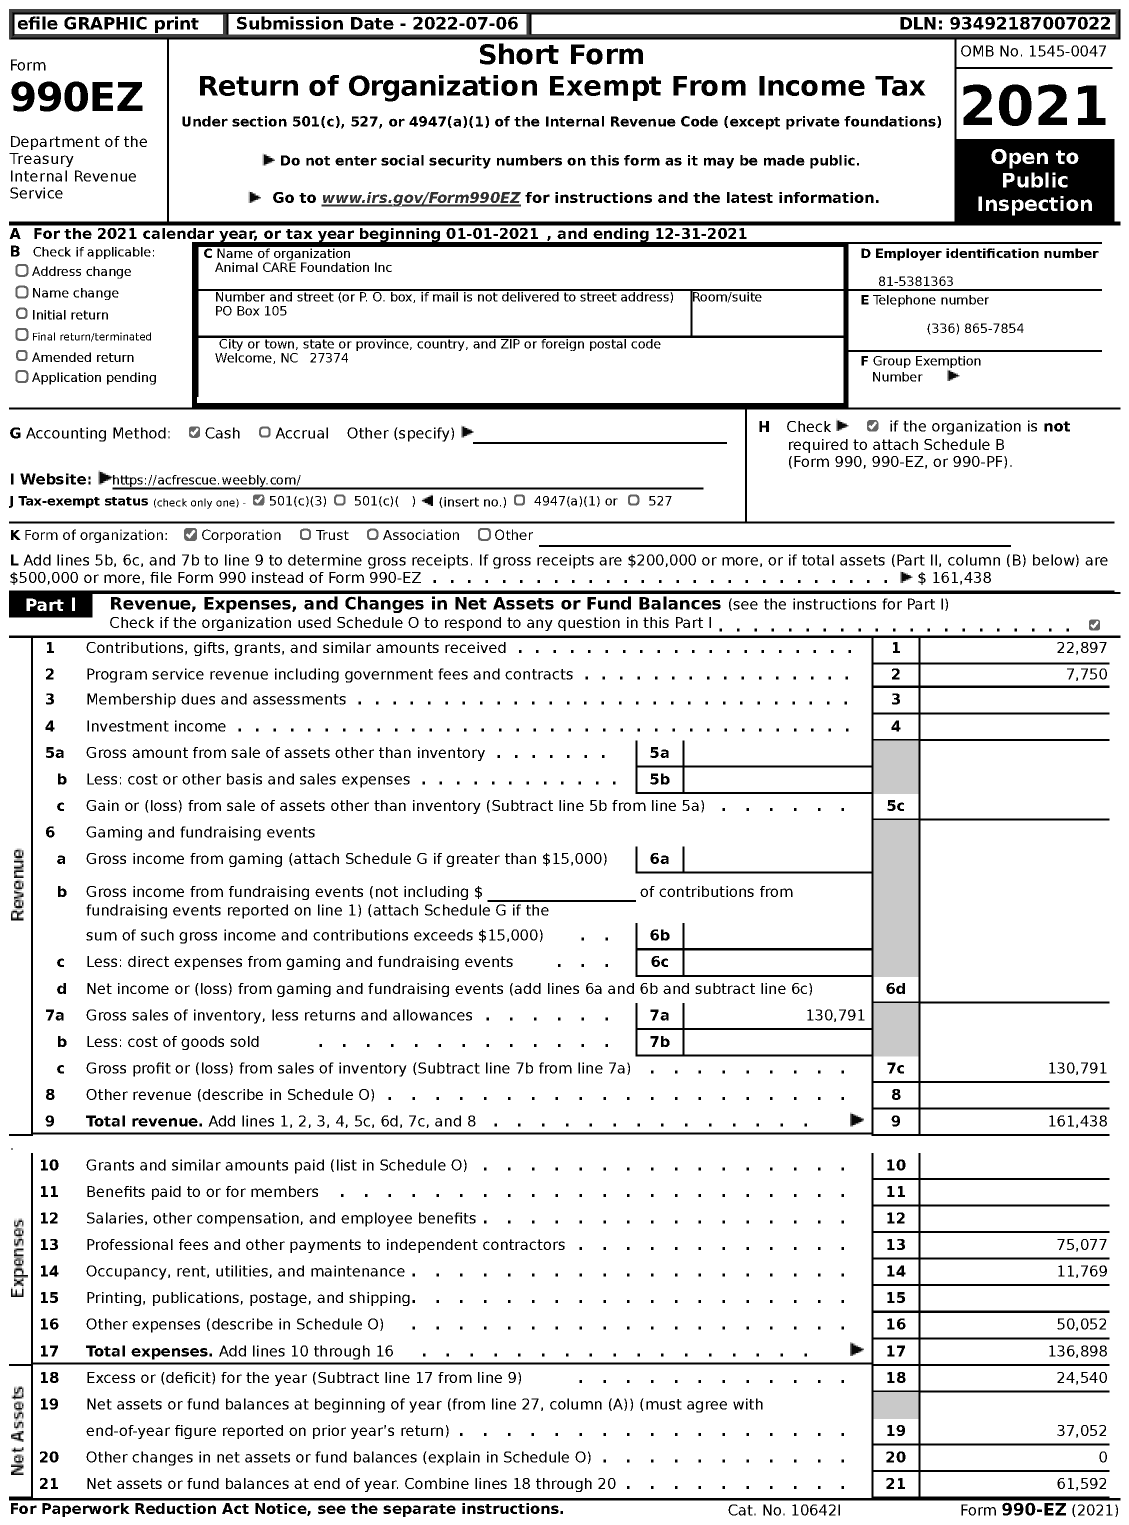 Image of first page of 2021 Form 990EZ for Animal CARE Foundation